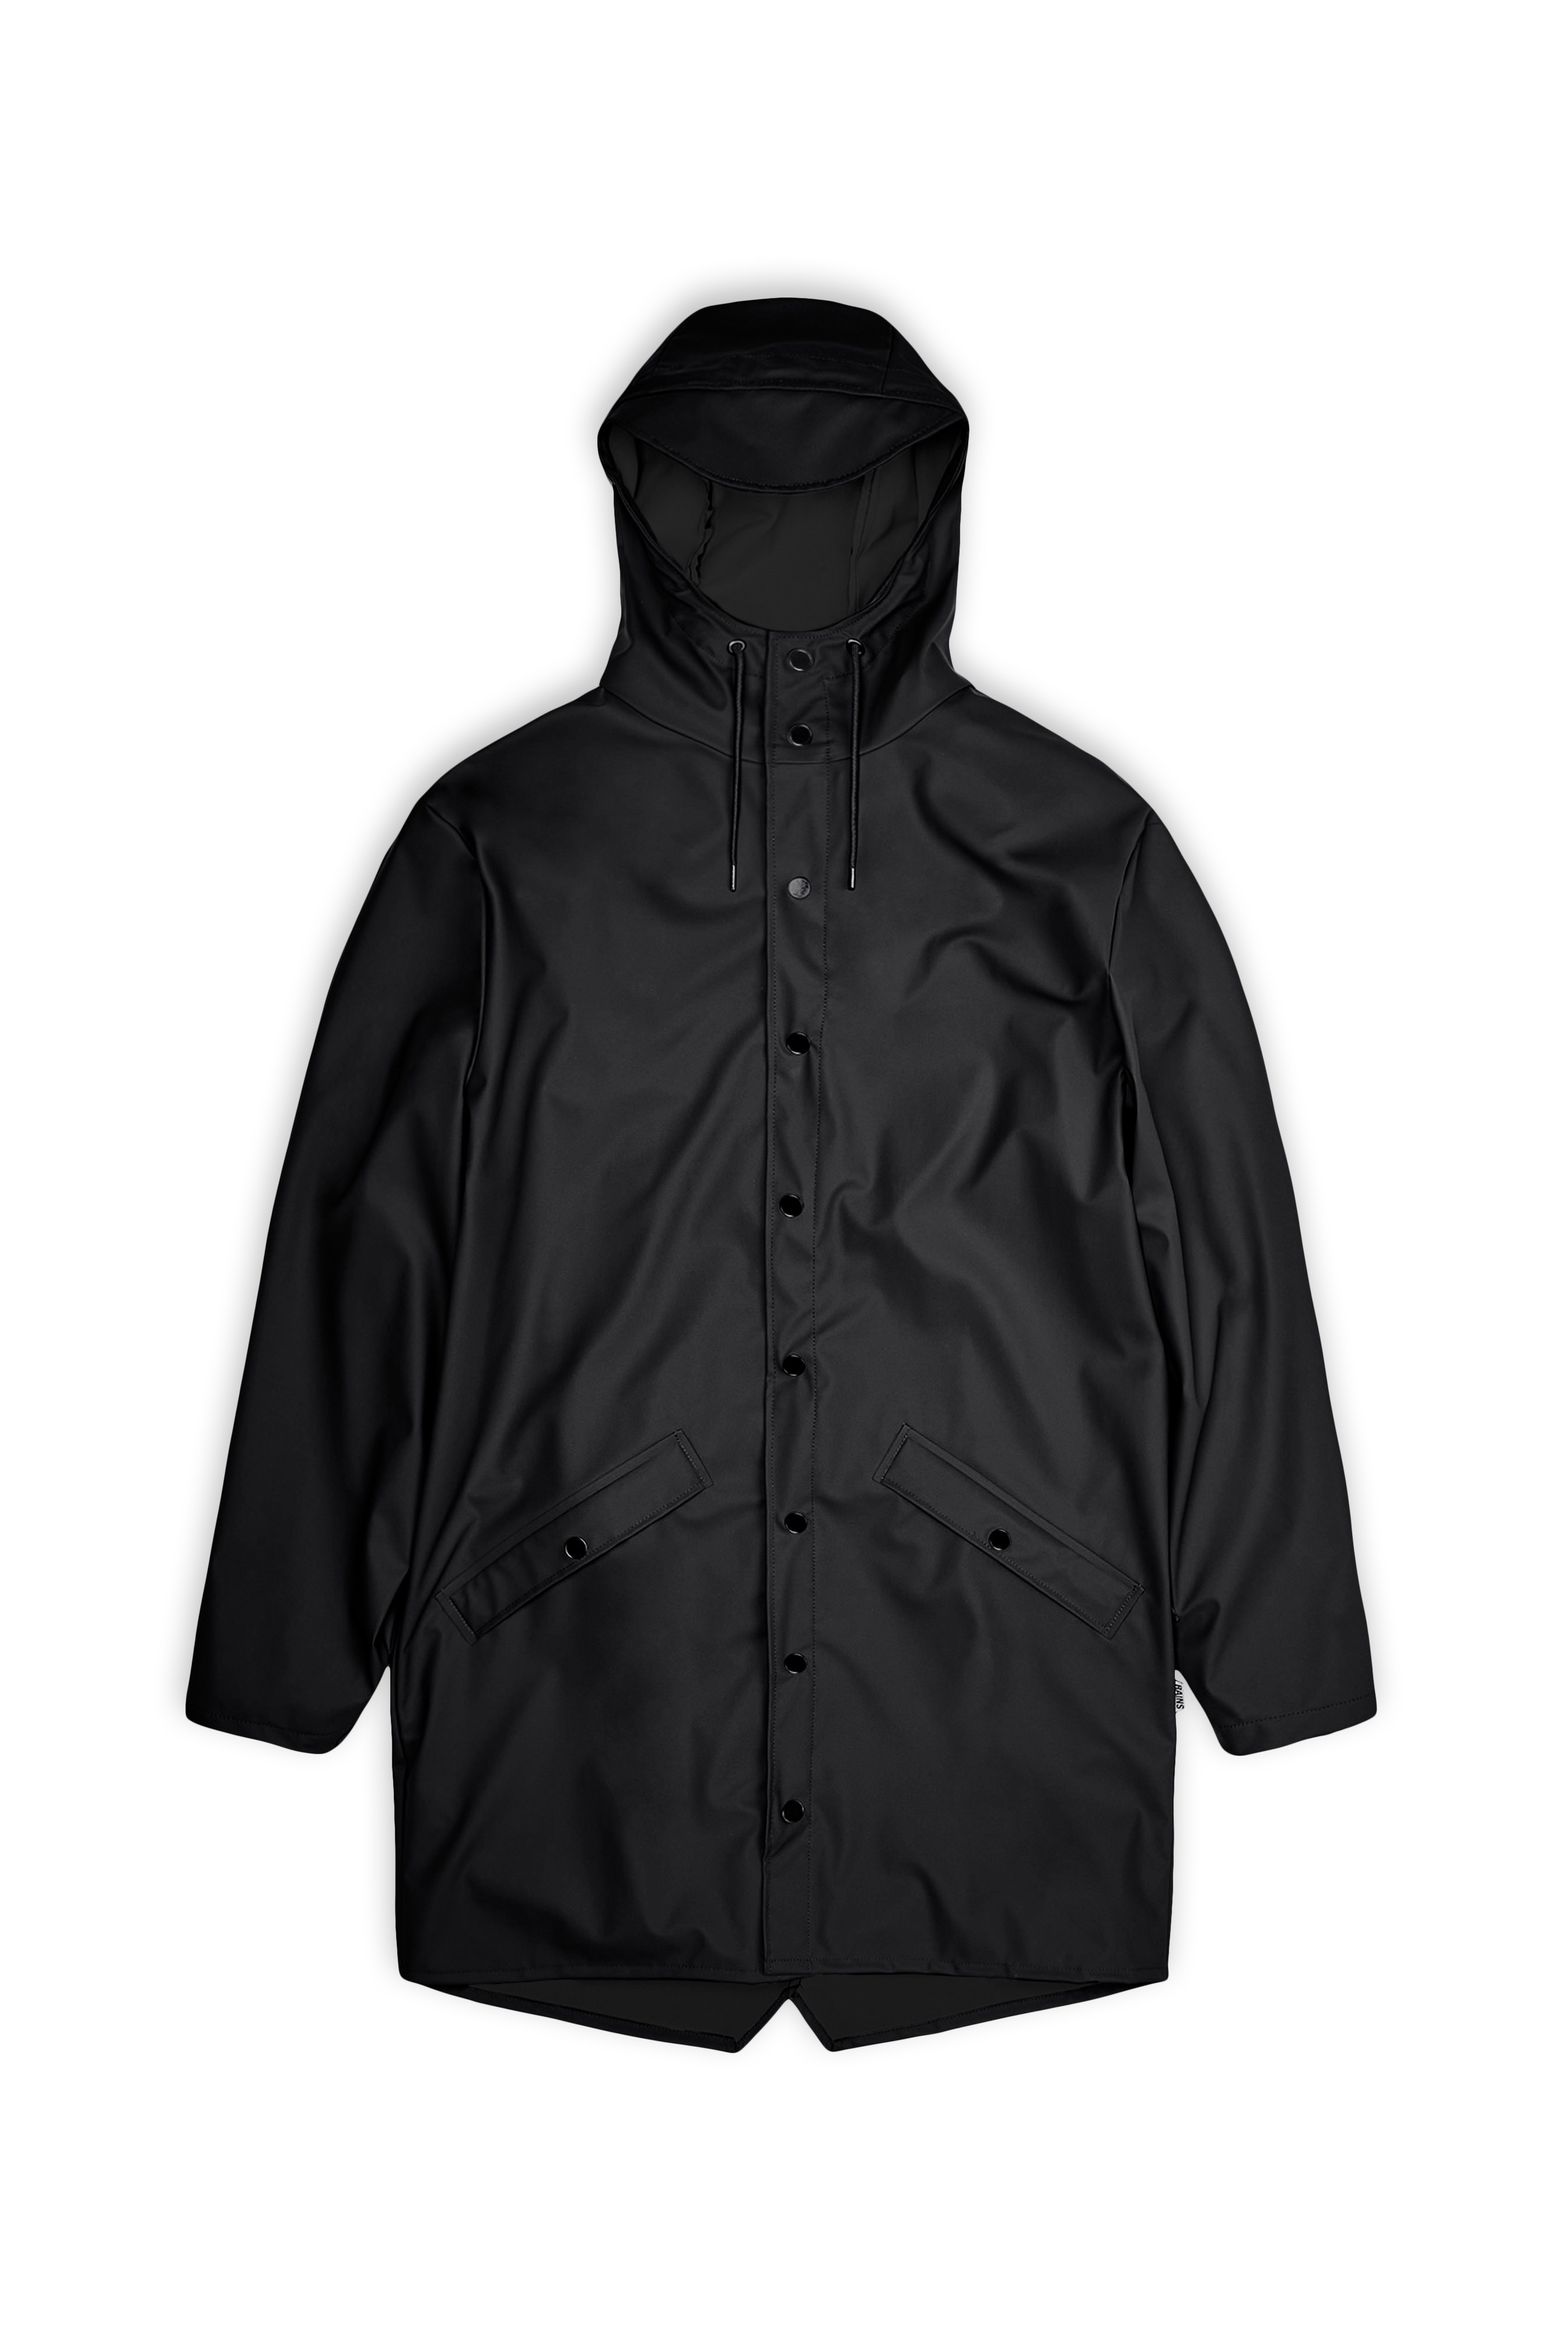 Rains® Long Jacket in Black for $180 | Free Shipping